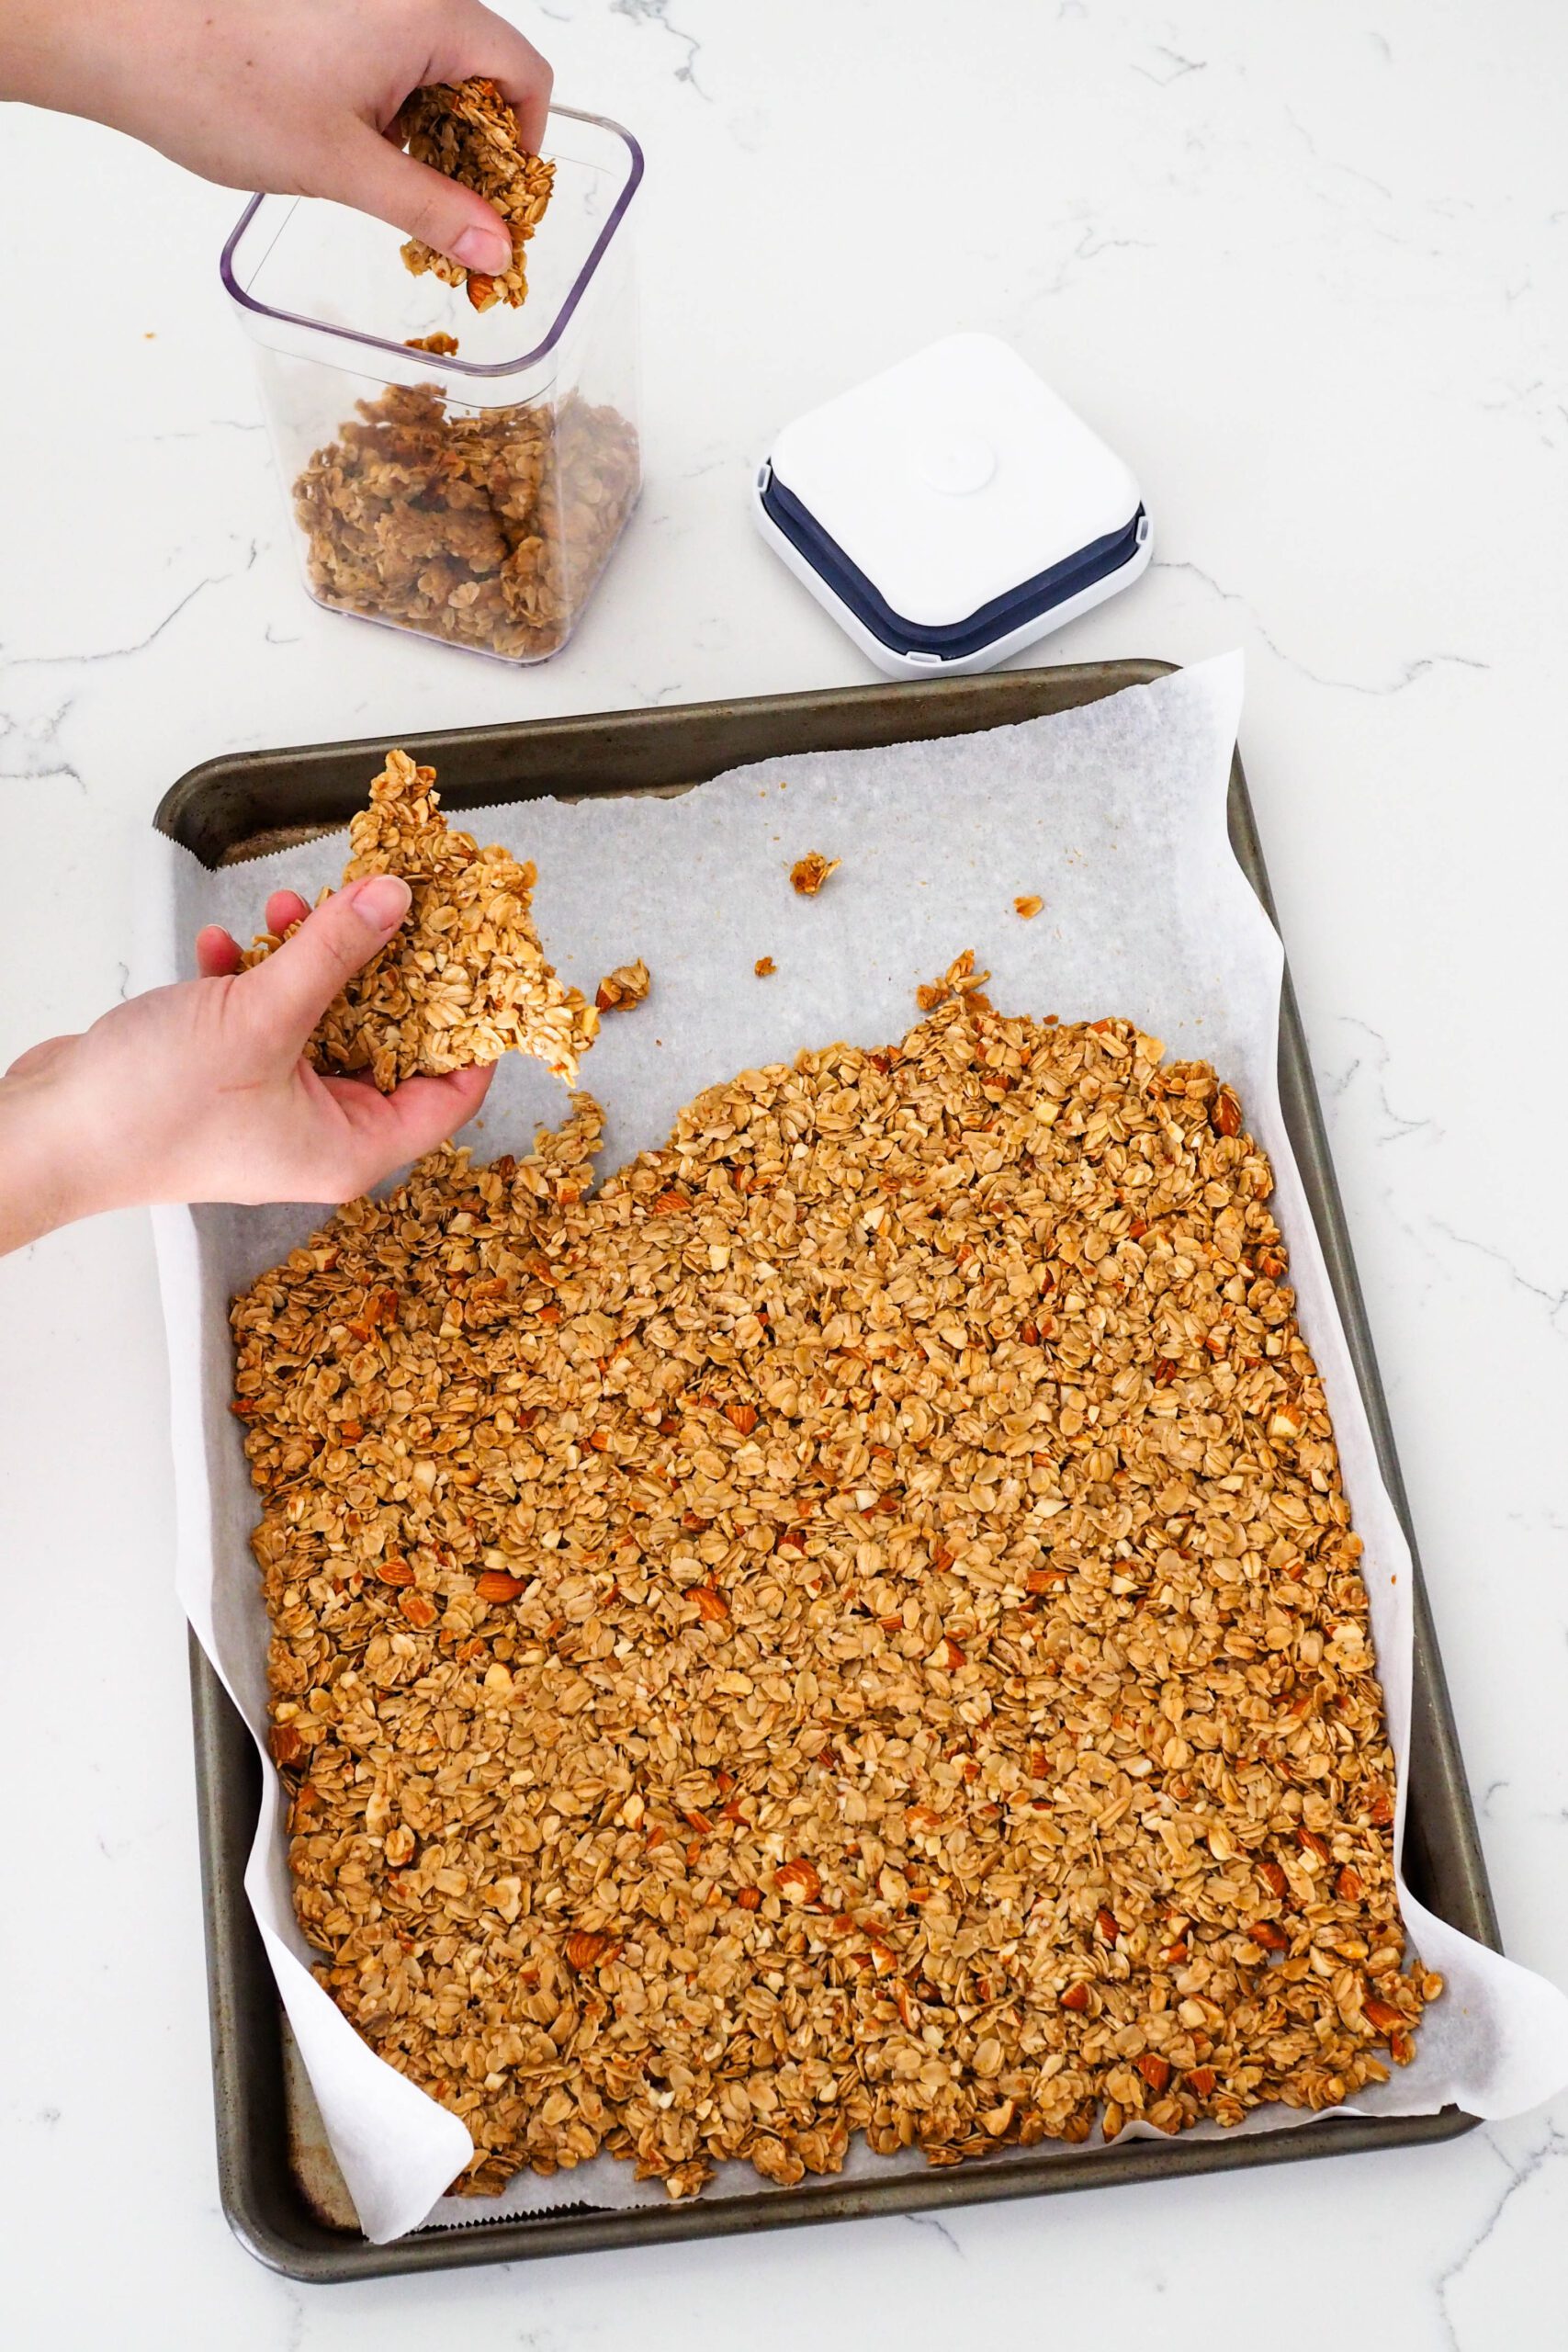 A hand breaks off a large triangle of granola from a pan.